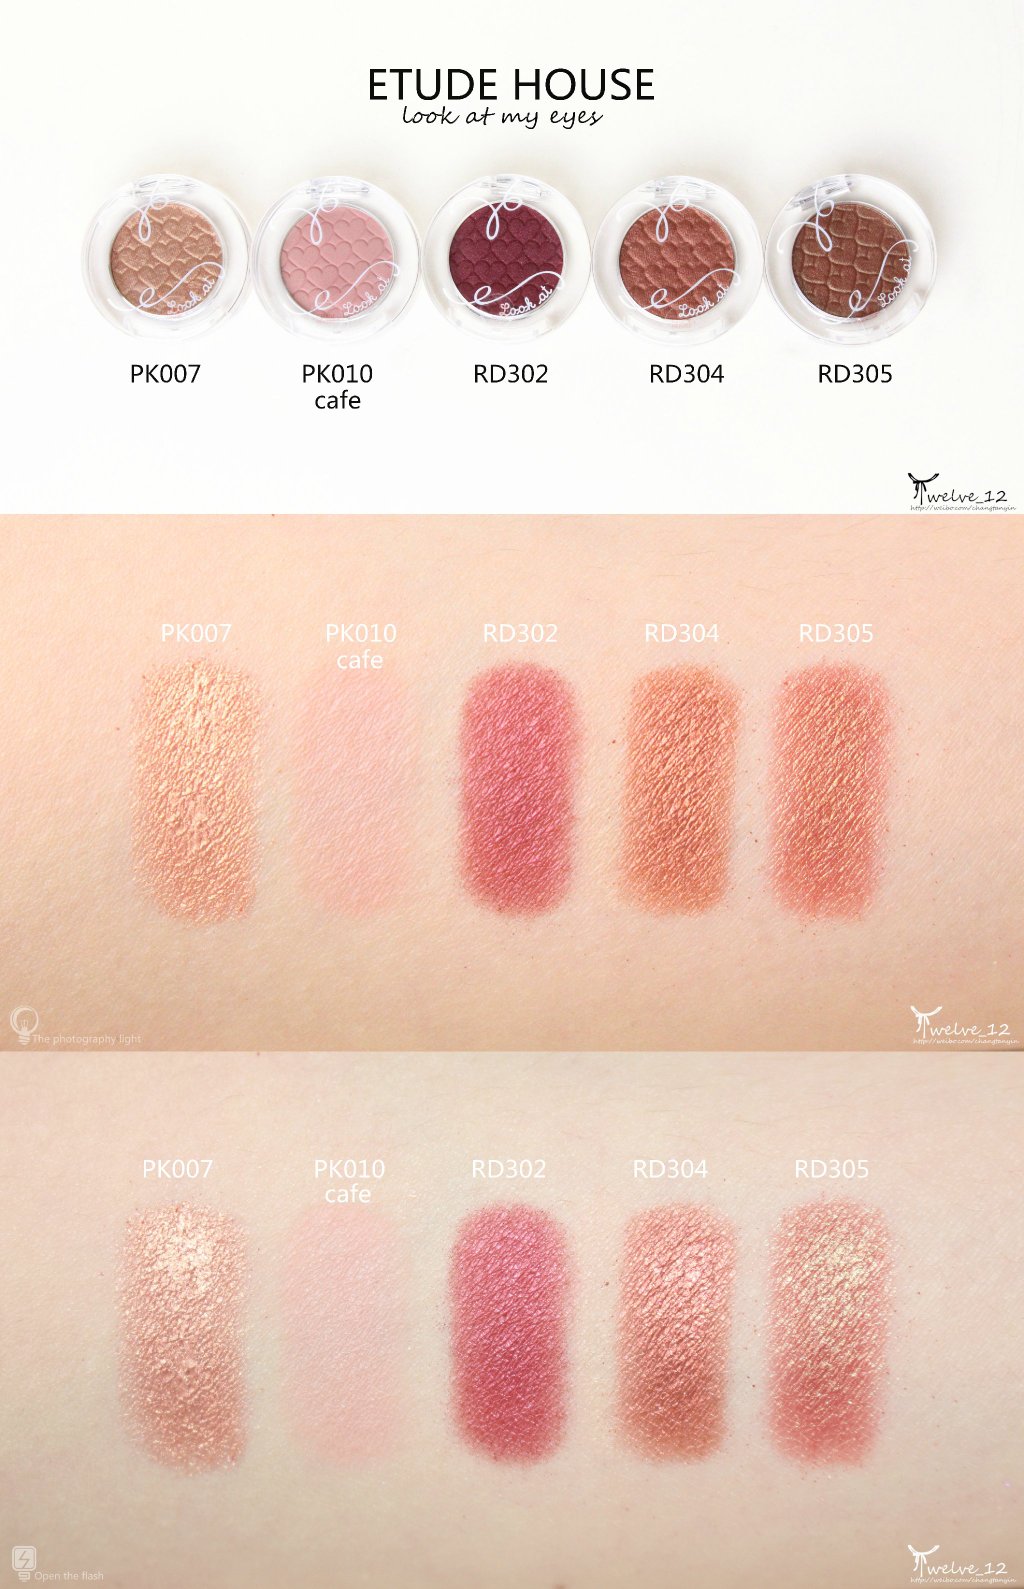 ETUDE HOUSE look at my eyes 爱丽单色眼影PK007、PK010(cafe)、RD302、RD304、RD305、BR410、BR417、GR706 ...